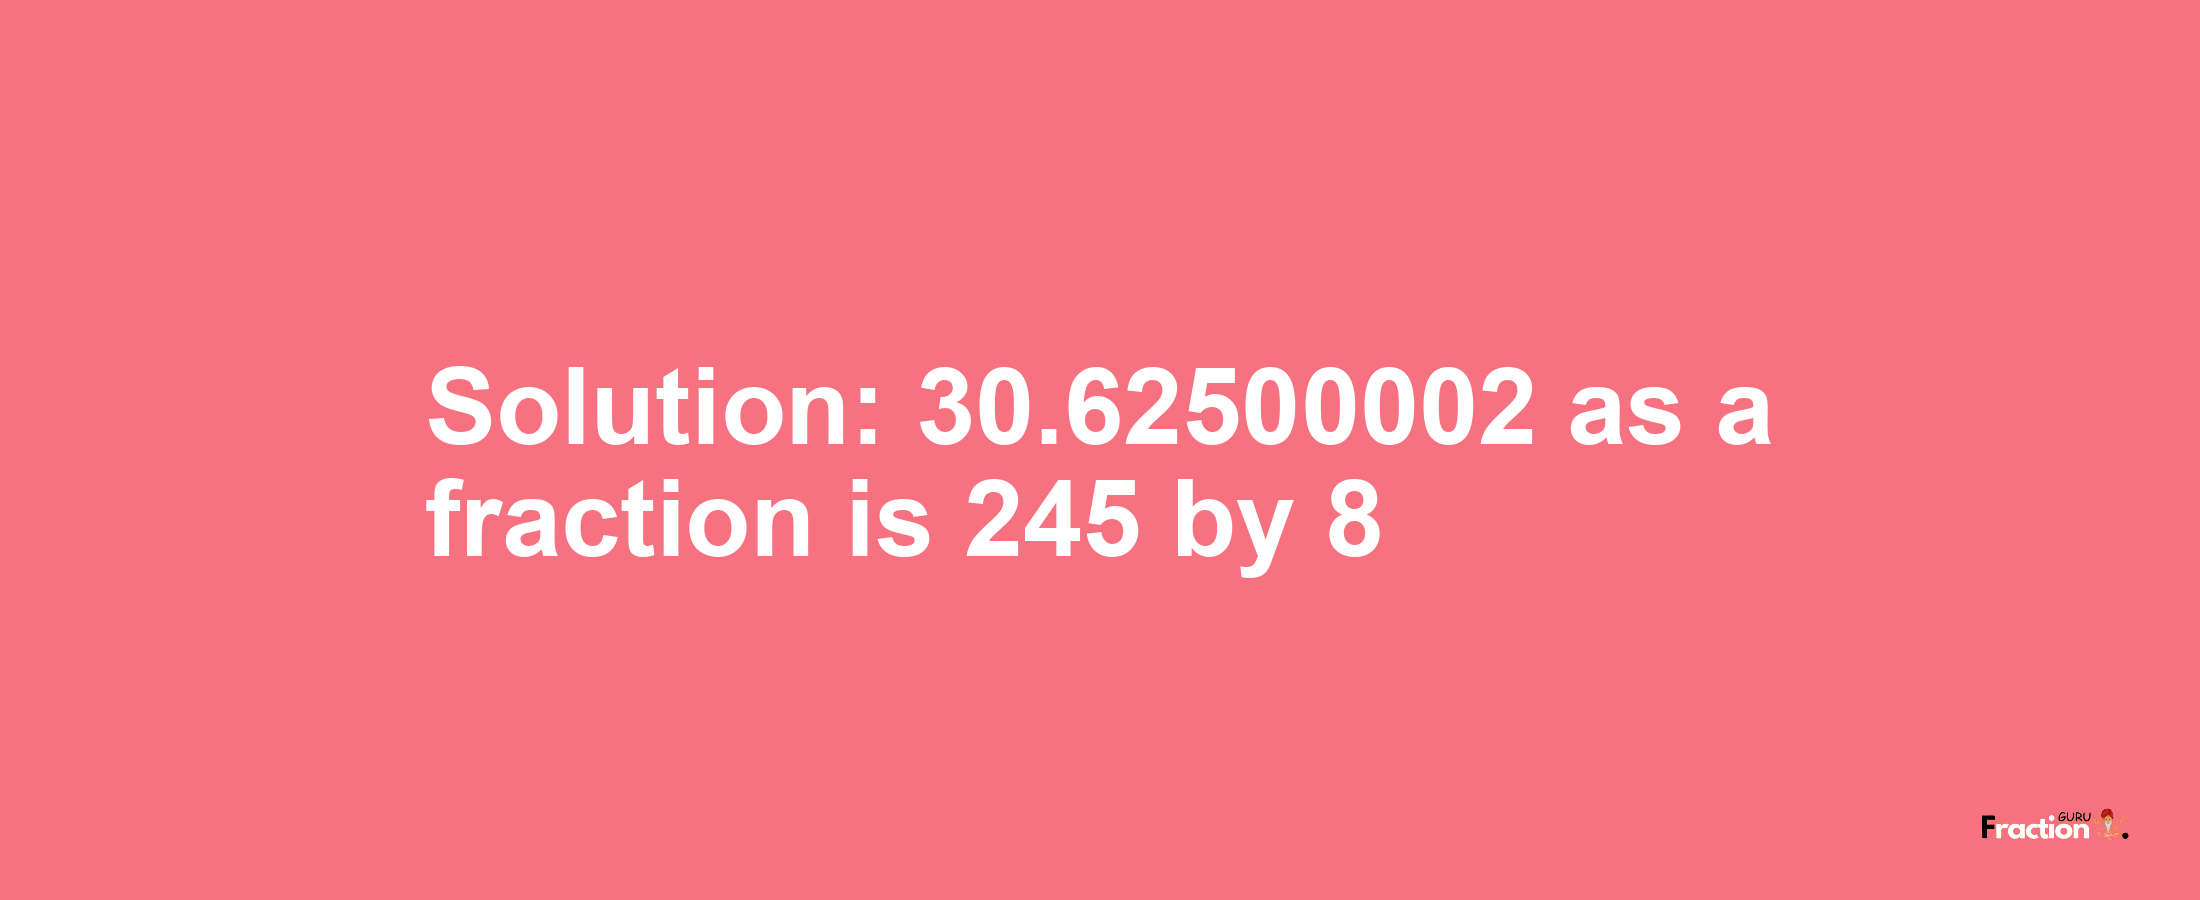 Solution:30.62500002 as a fraction is 245/8